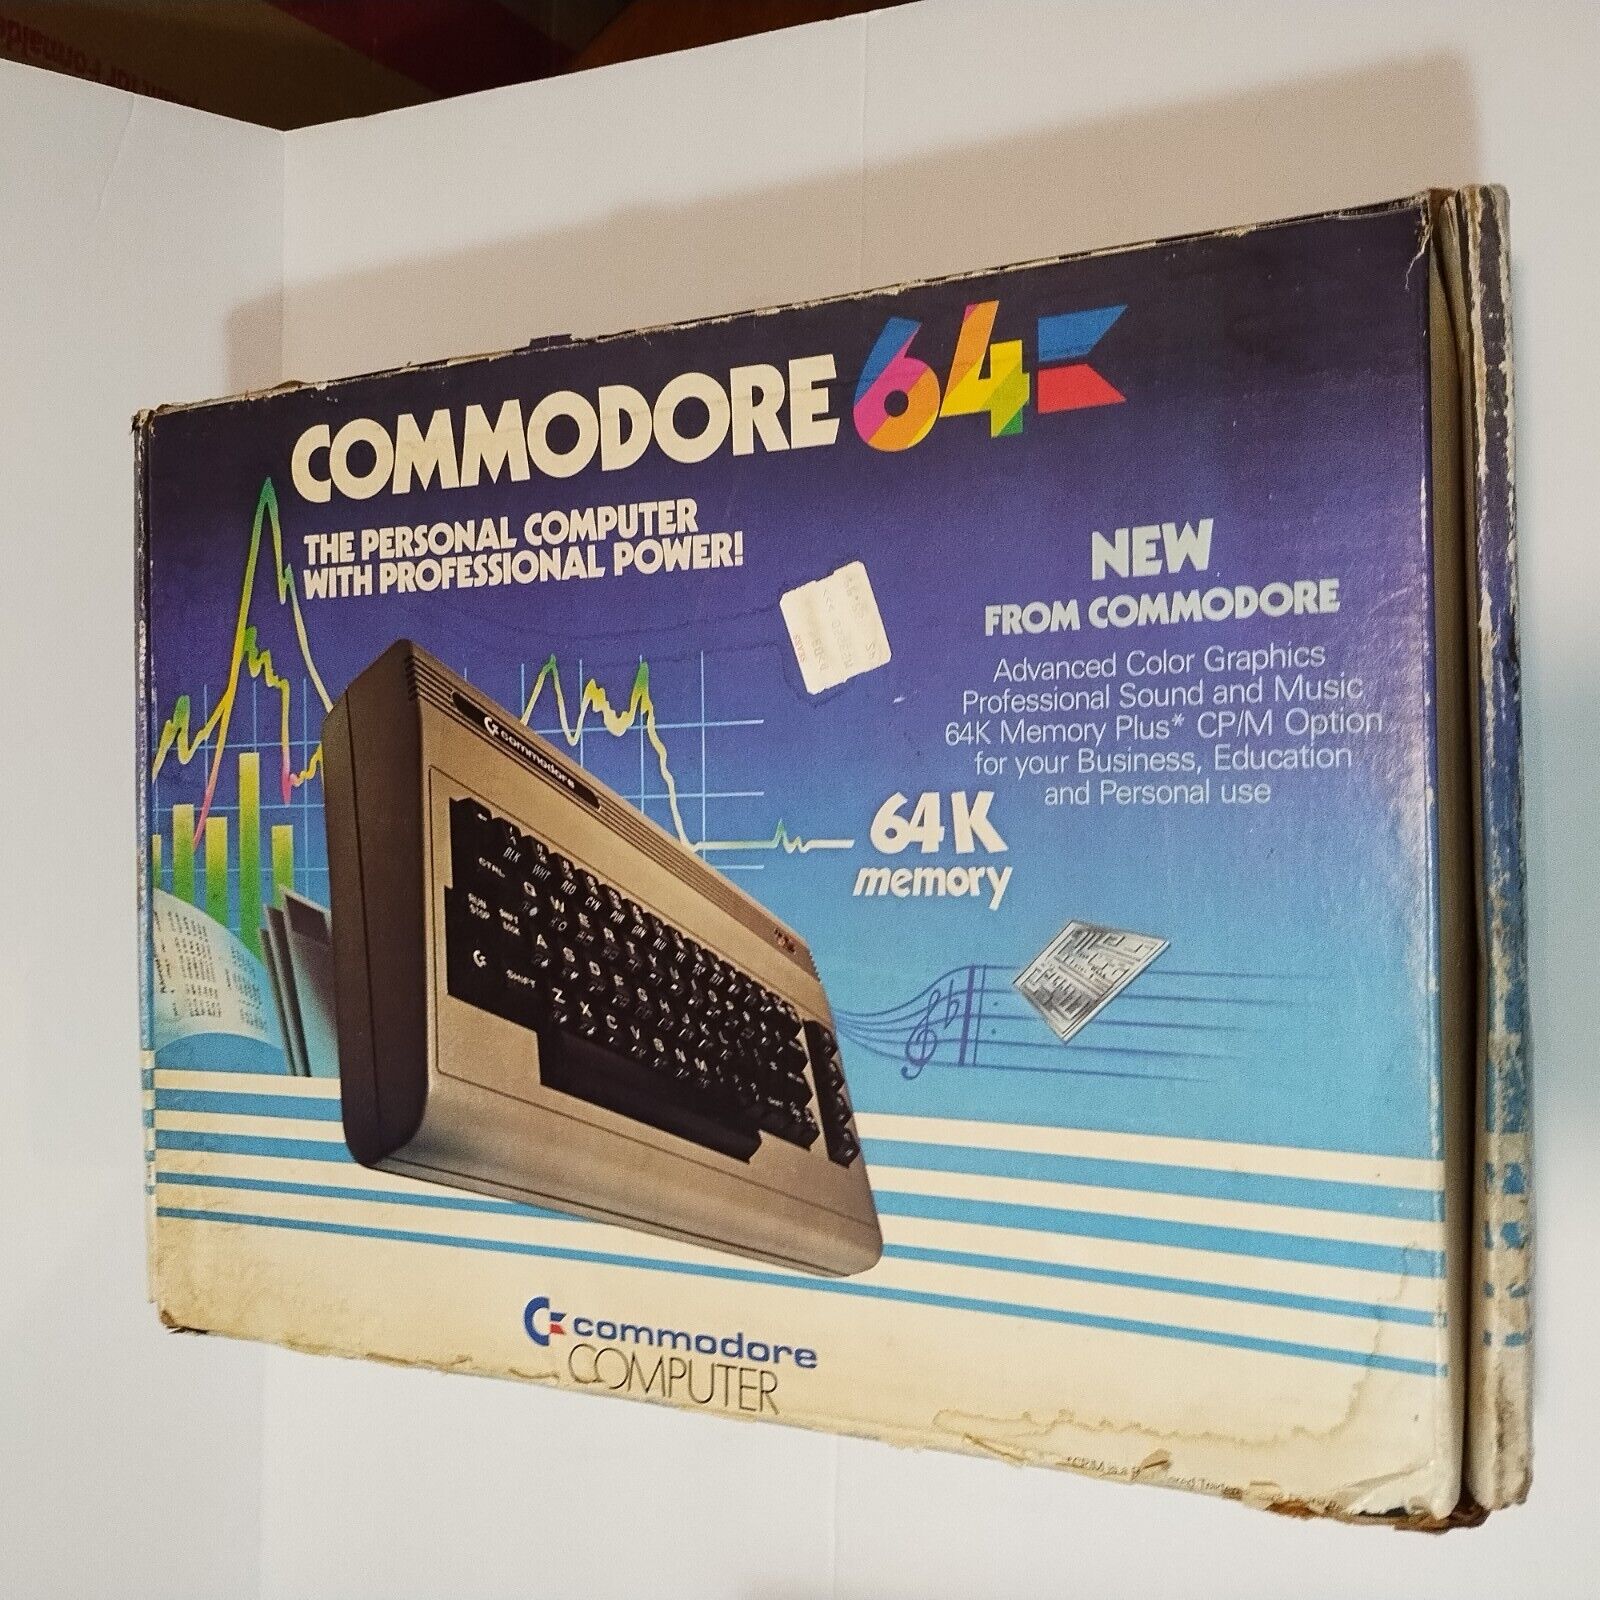 Commodore 64 Computer System in original box with cords  Tested- Powers on